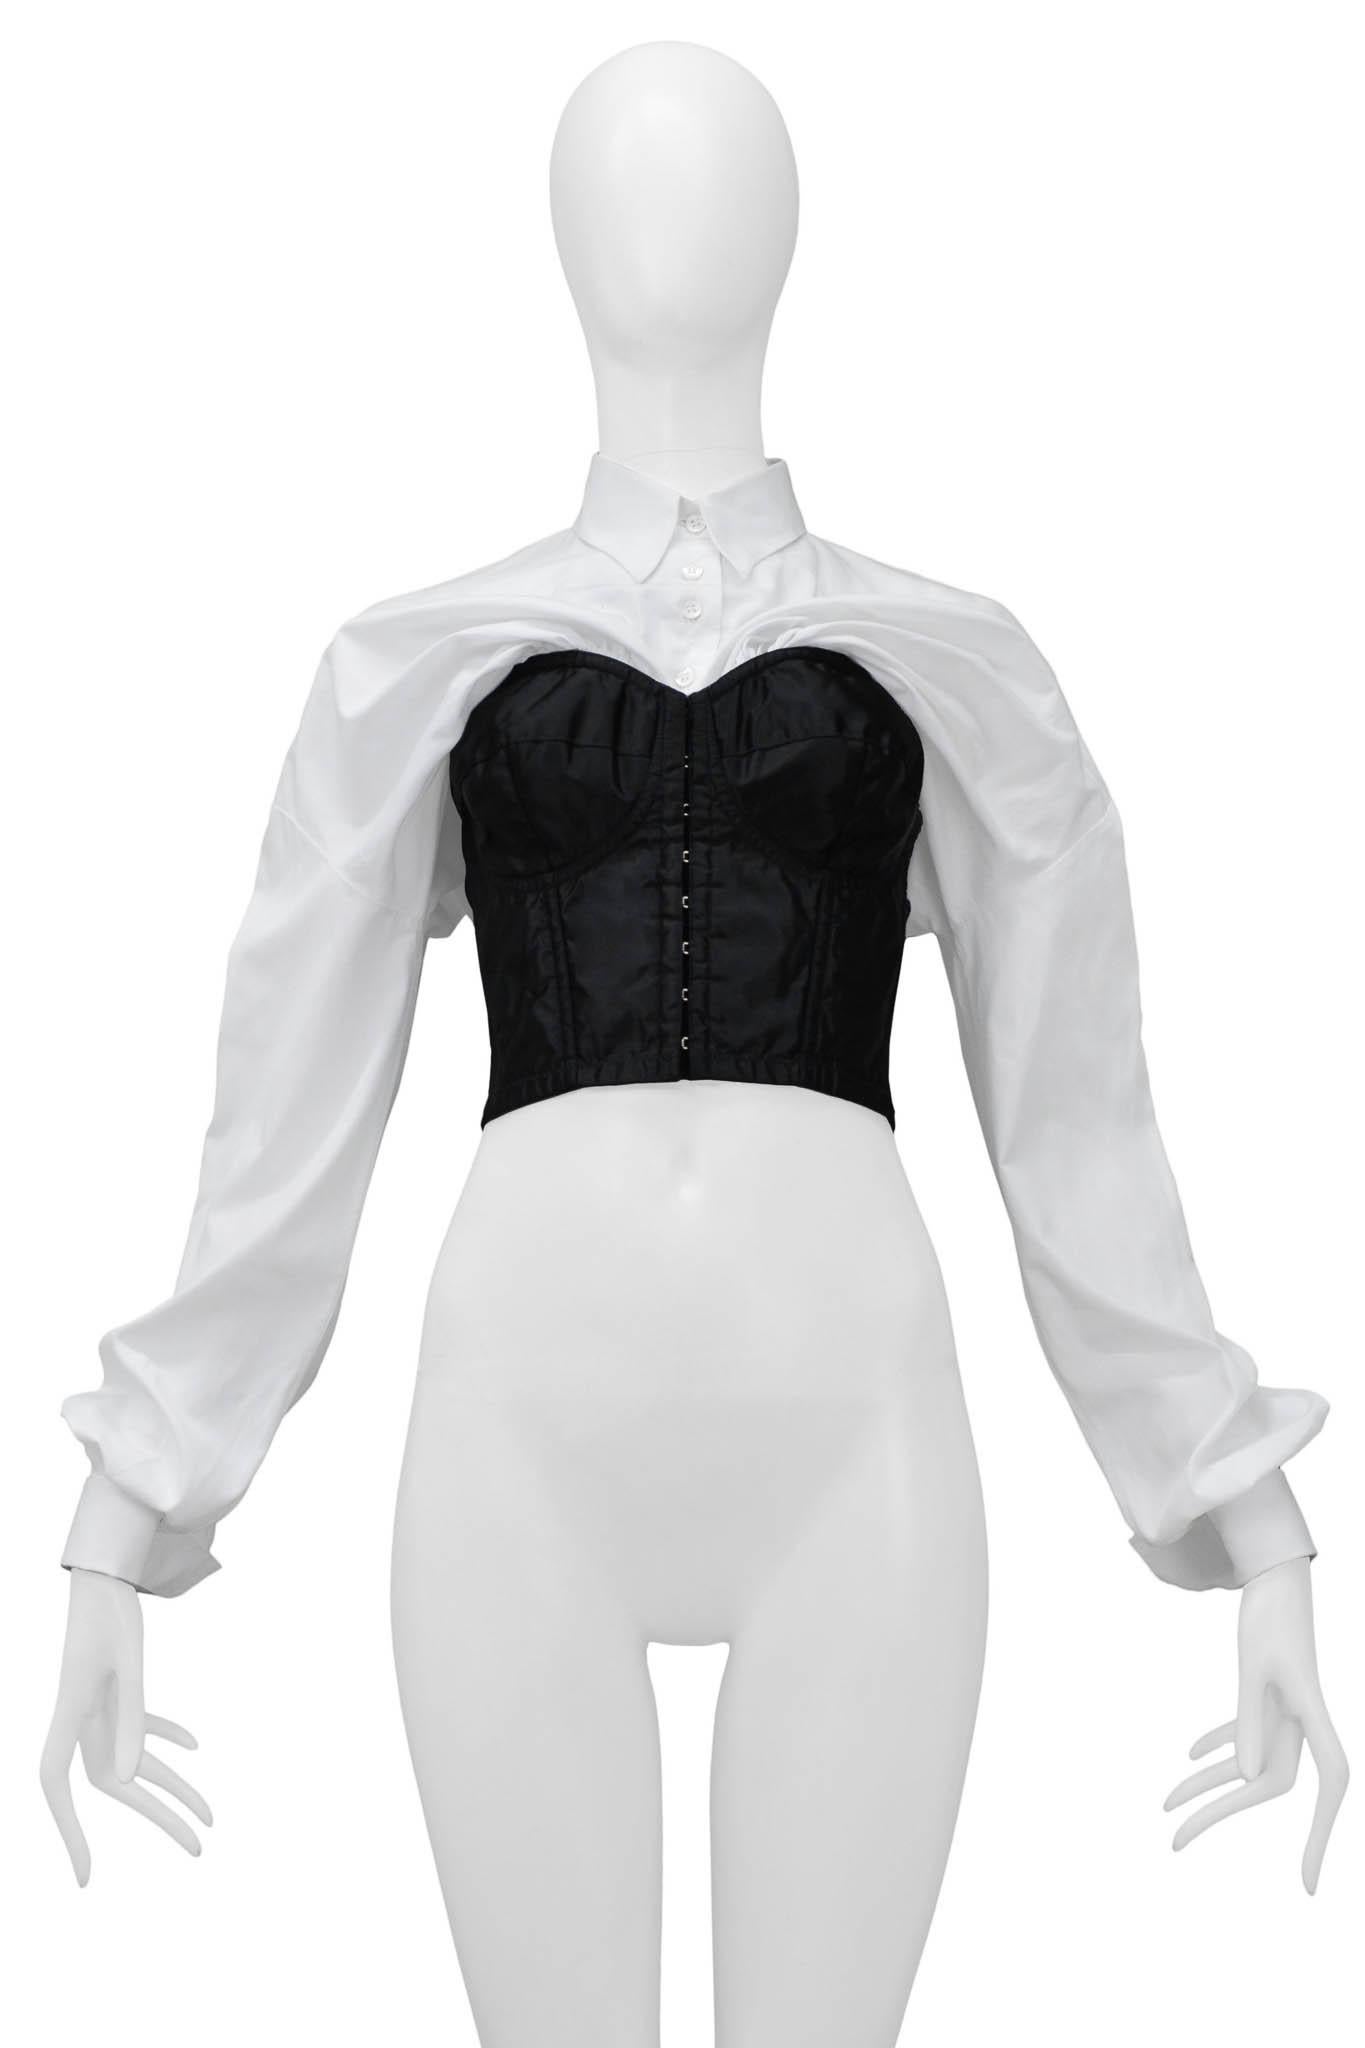 Resurrection Vintage is excited to offer a vintage Dolce & Gabbana black satin bustier top featuring hook and eye center front closure, attached white cotton button-down shirt with long sleeves, and folding collar.  

Dolce & Gabbana
Size 42
Satin